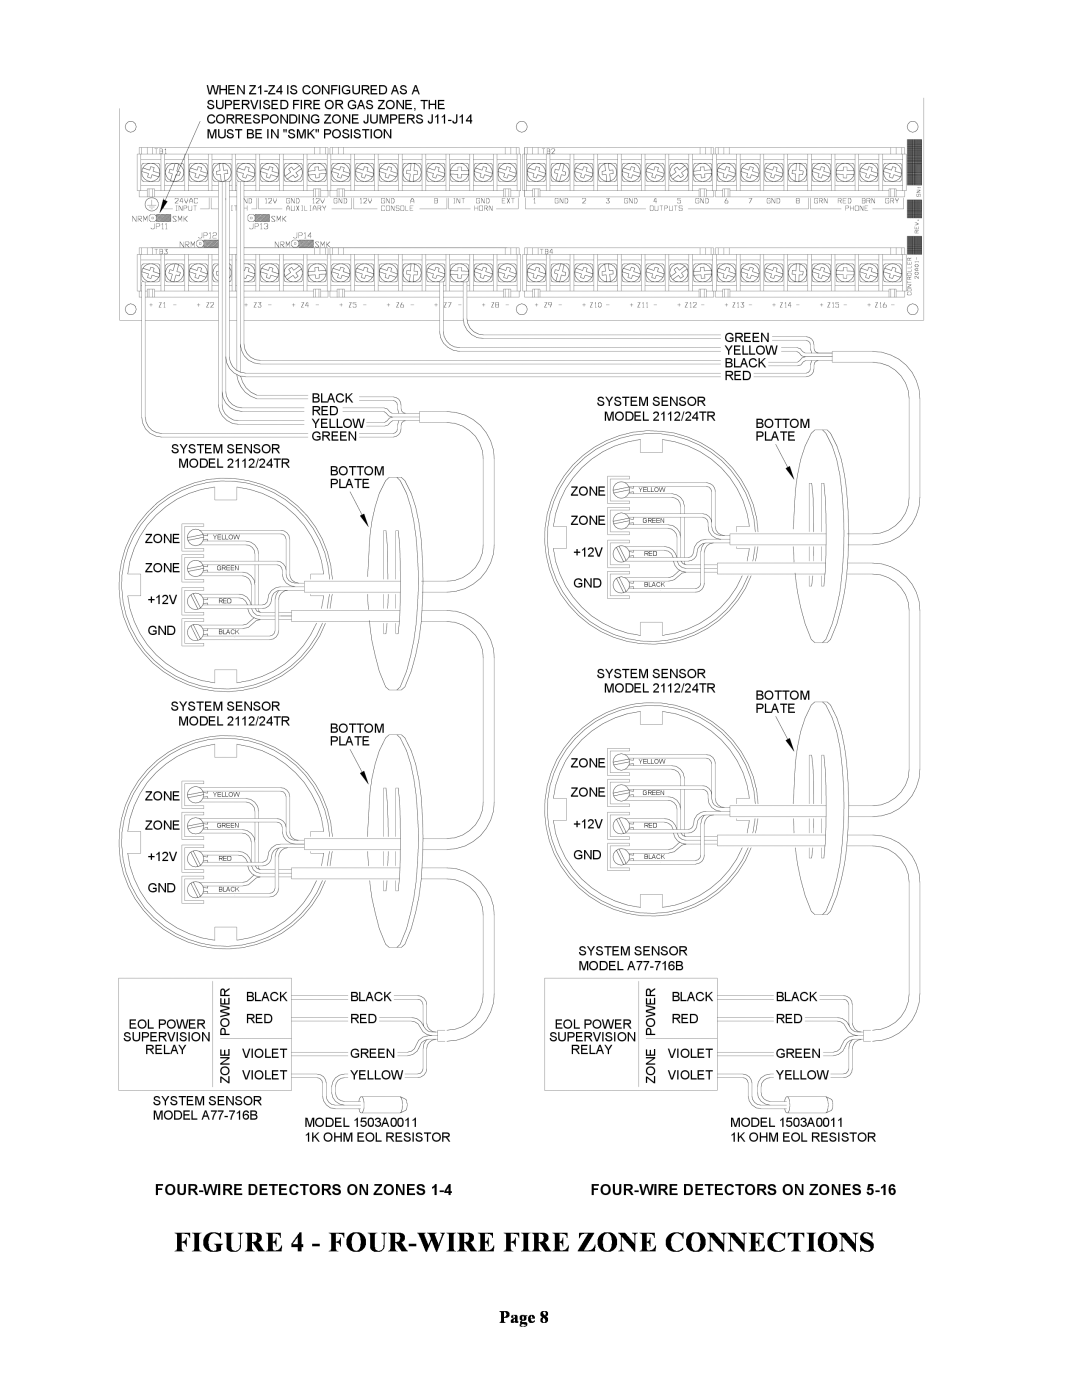 Home Automation 20A00-1 installation manual Four-Wirefire Zone Connections, Page, Four-Wiredetectors On Zones 